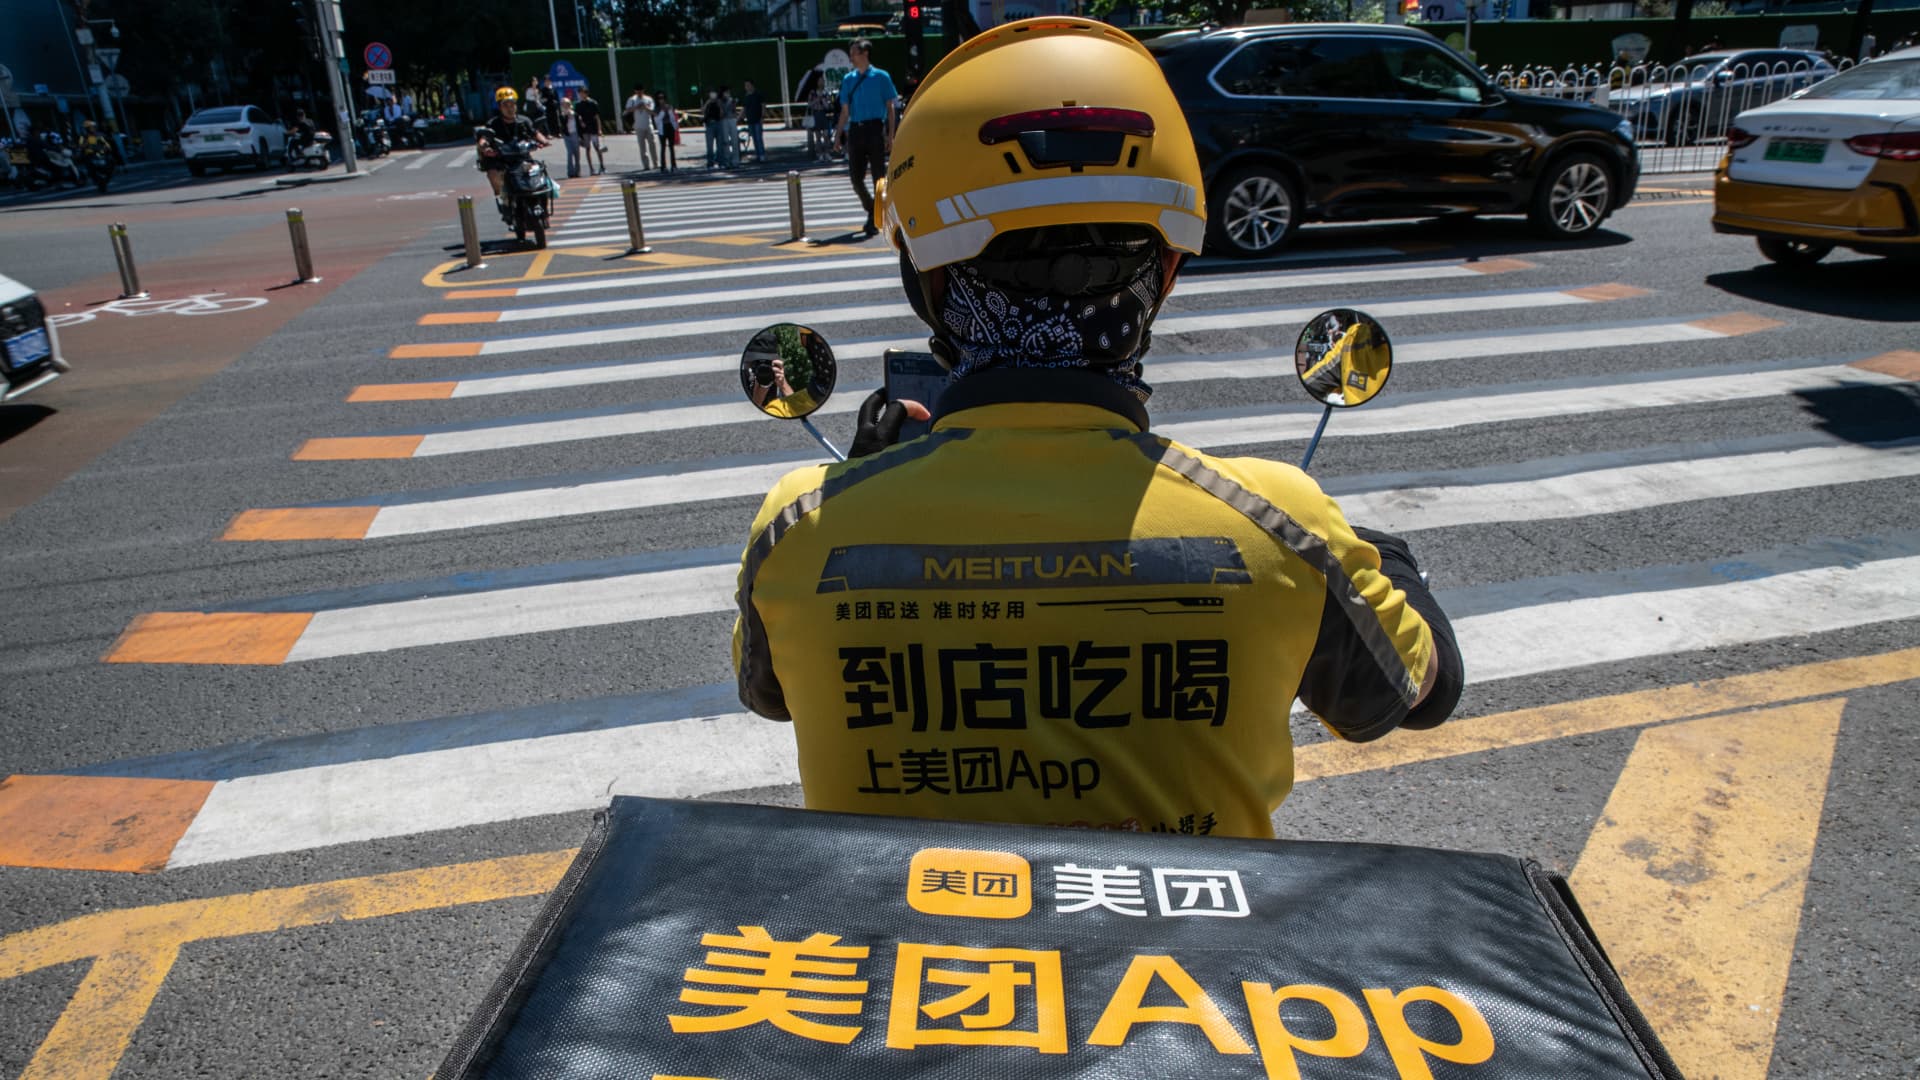 China's Meituan lost  billion in market cap amid rising competition, slowdown in food delivery business